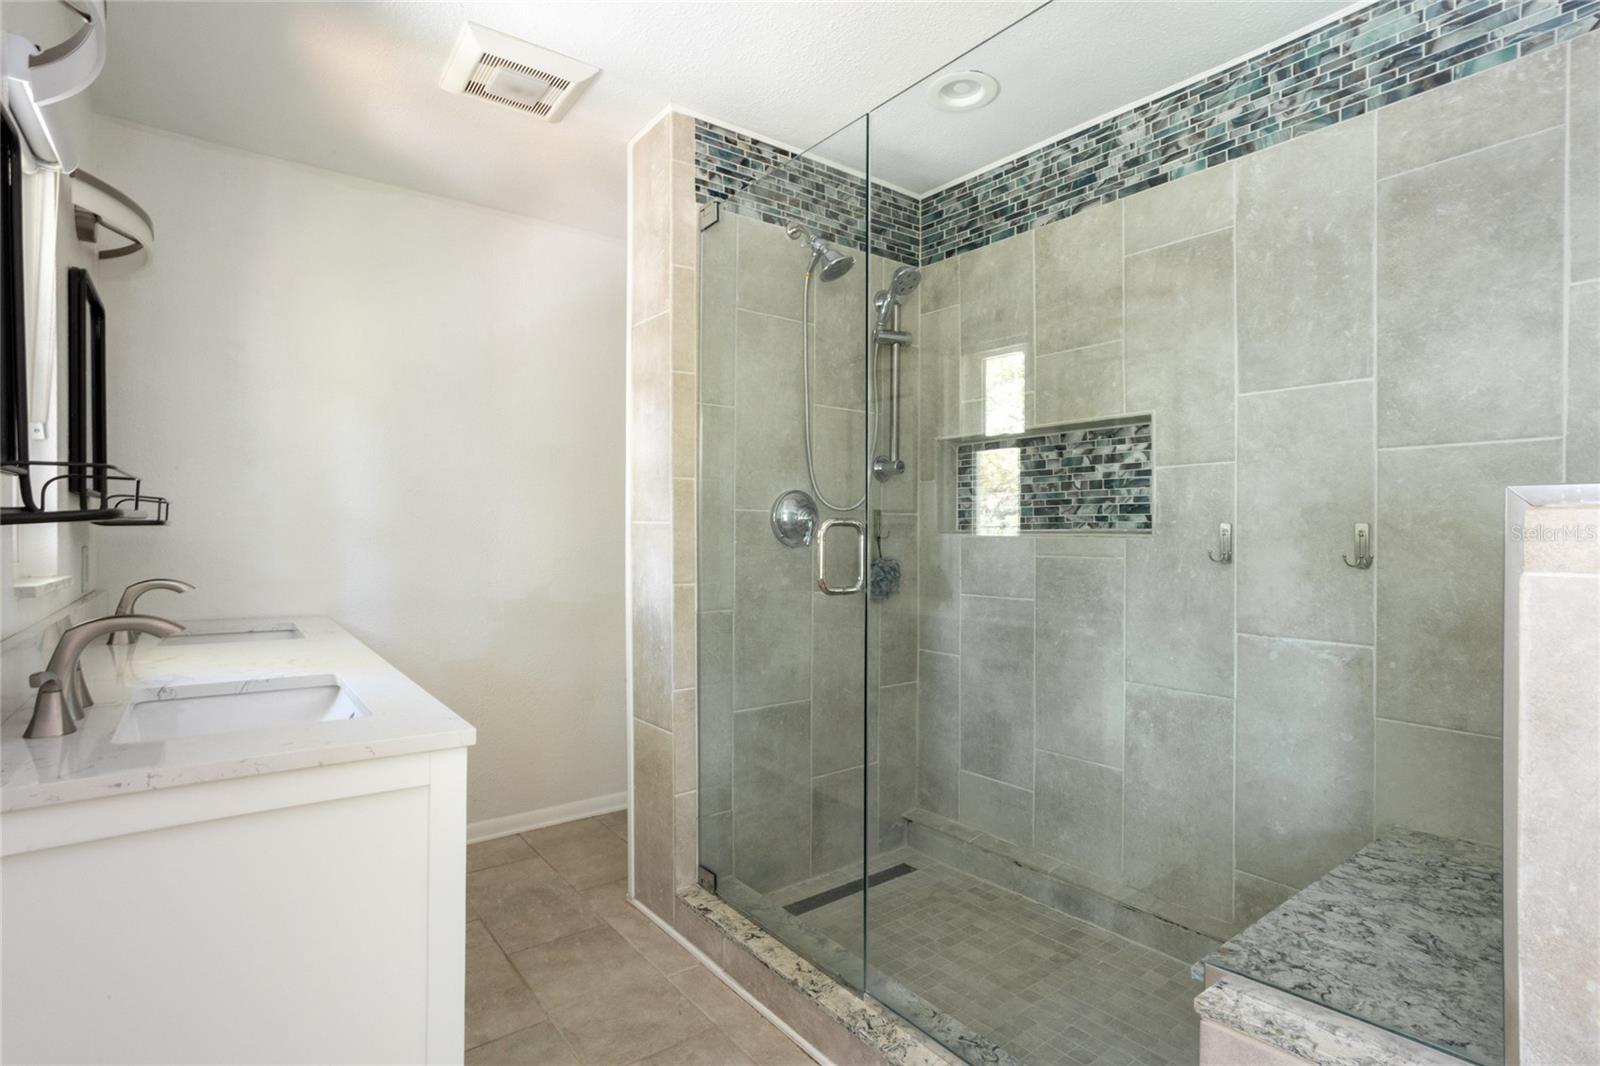 Large glass shower with sitting bench